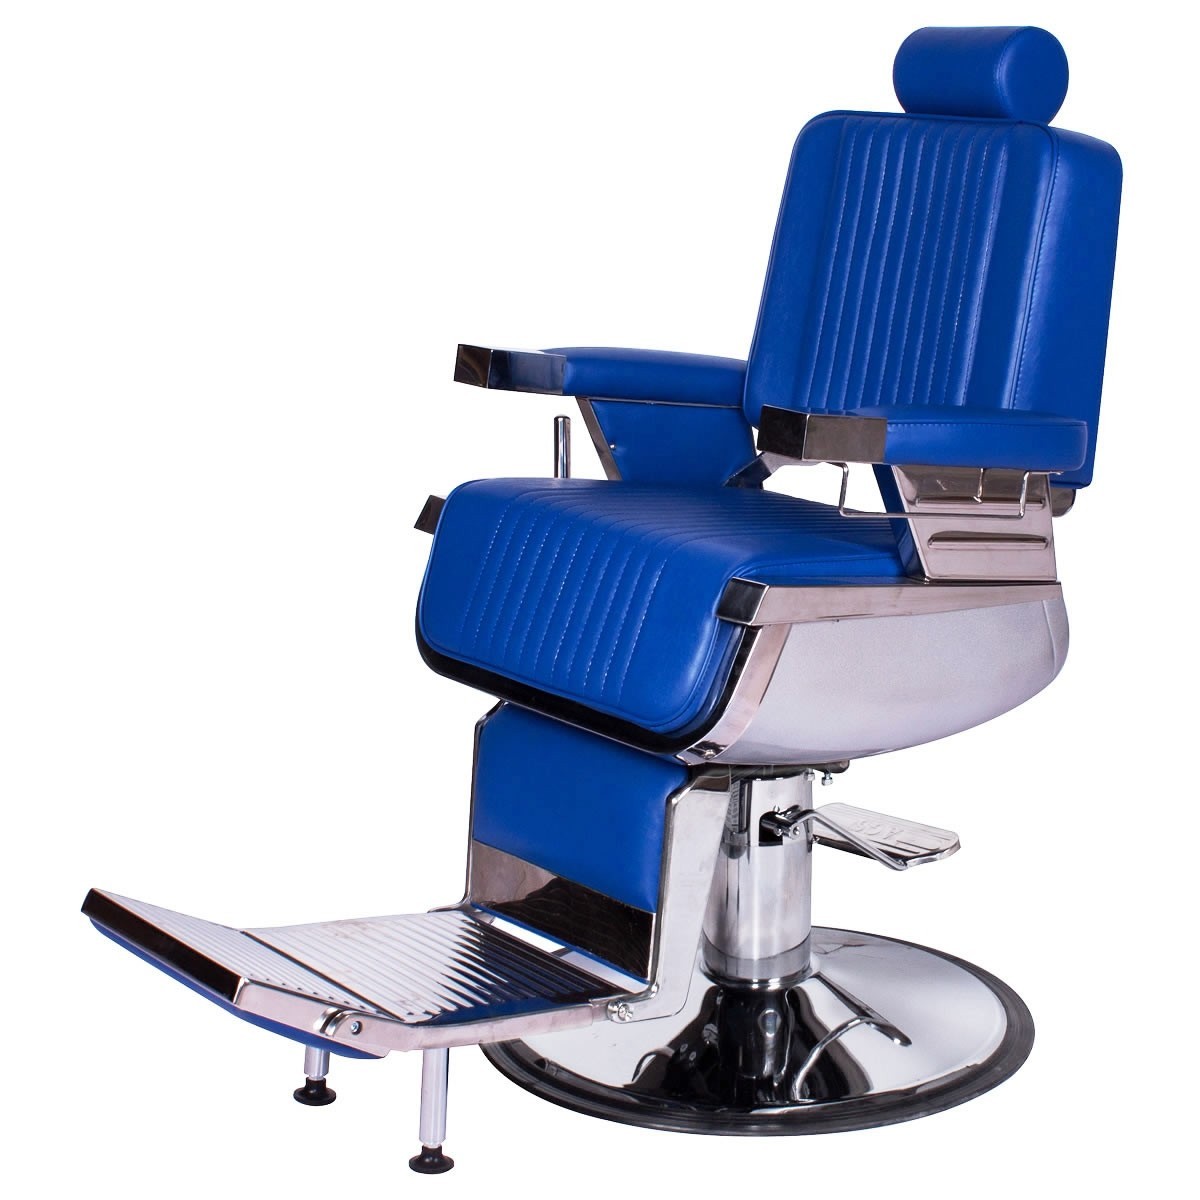 "CONTINENTAL" Barber Chair in Cobalt Blue